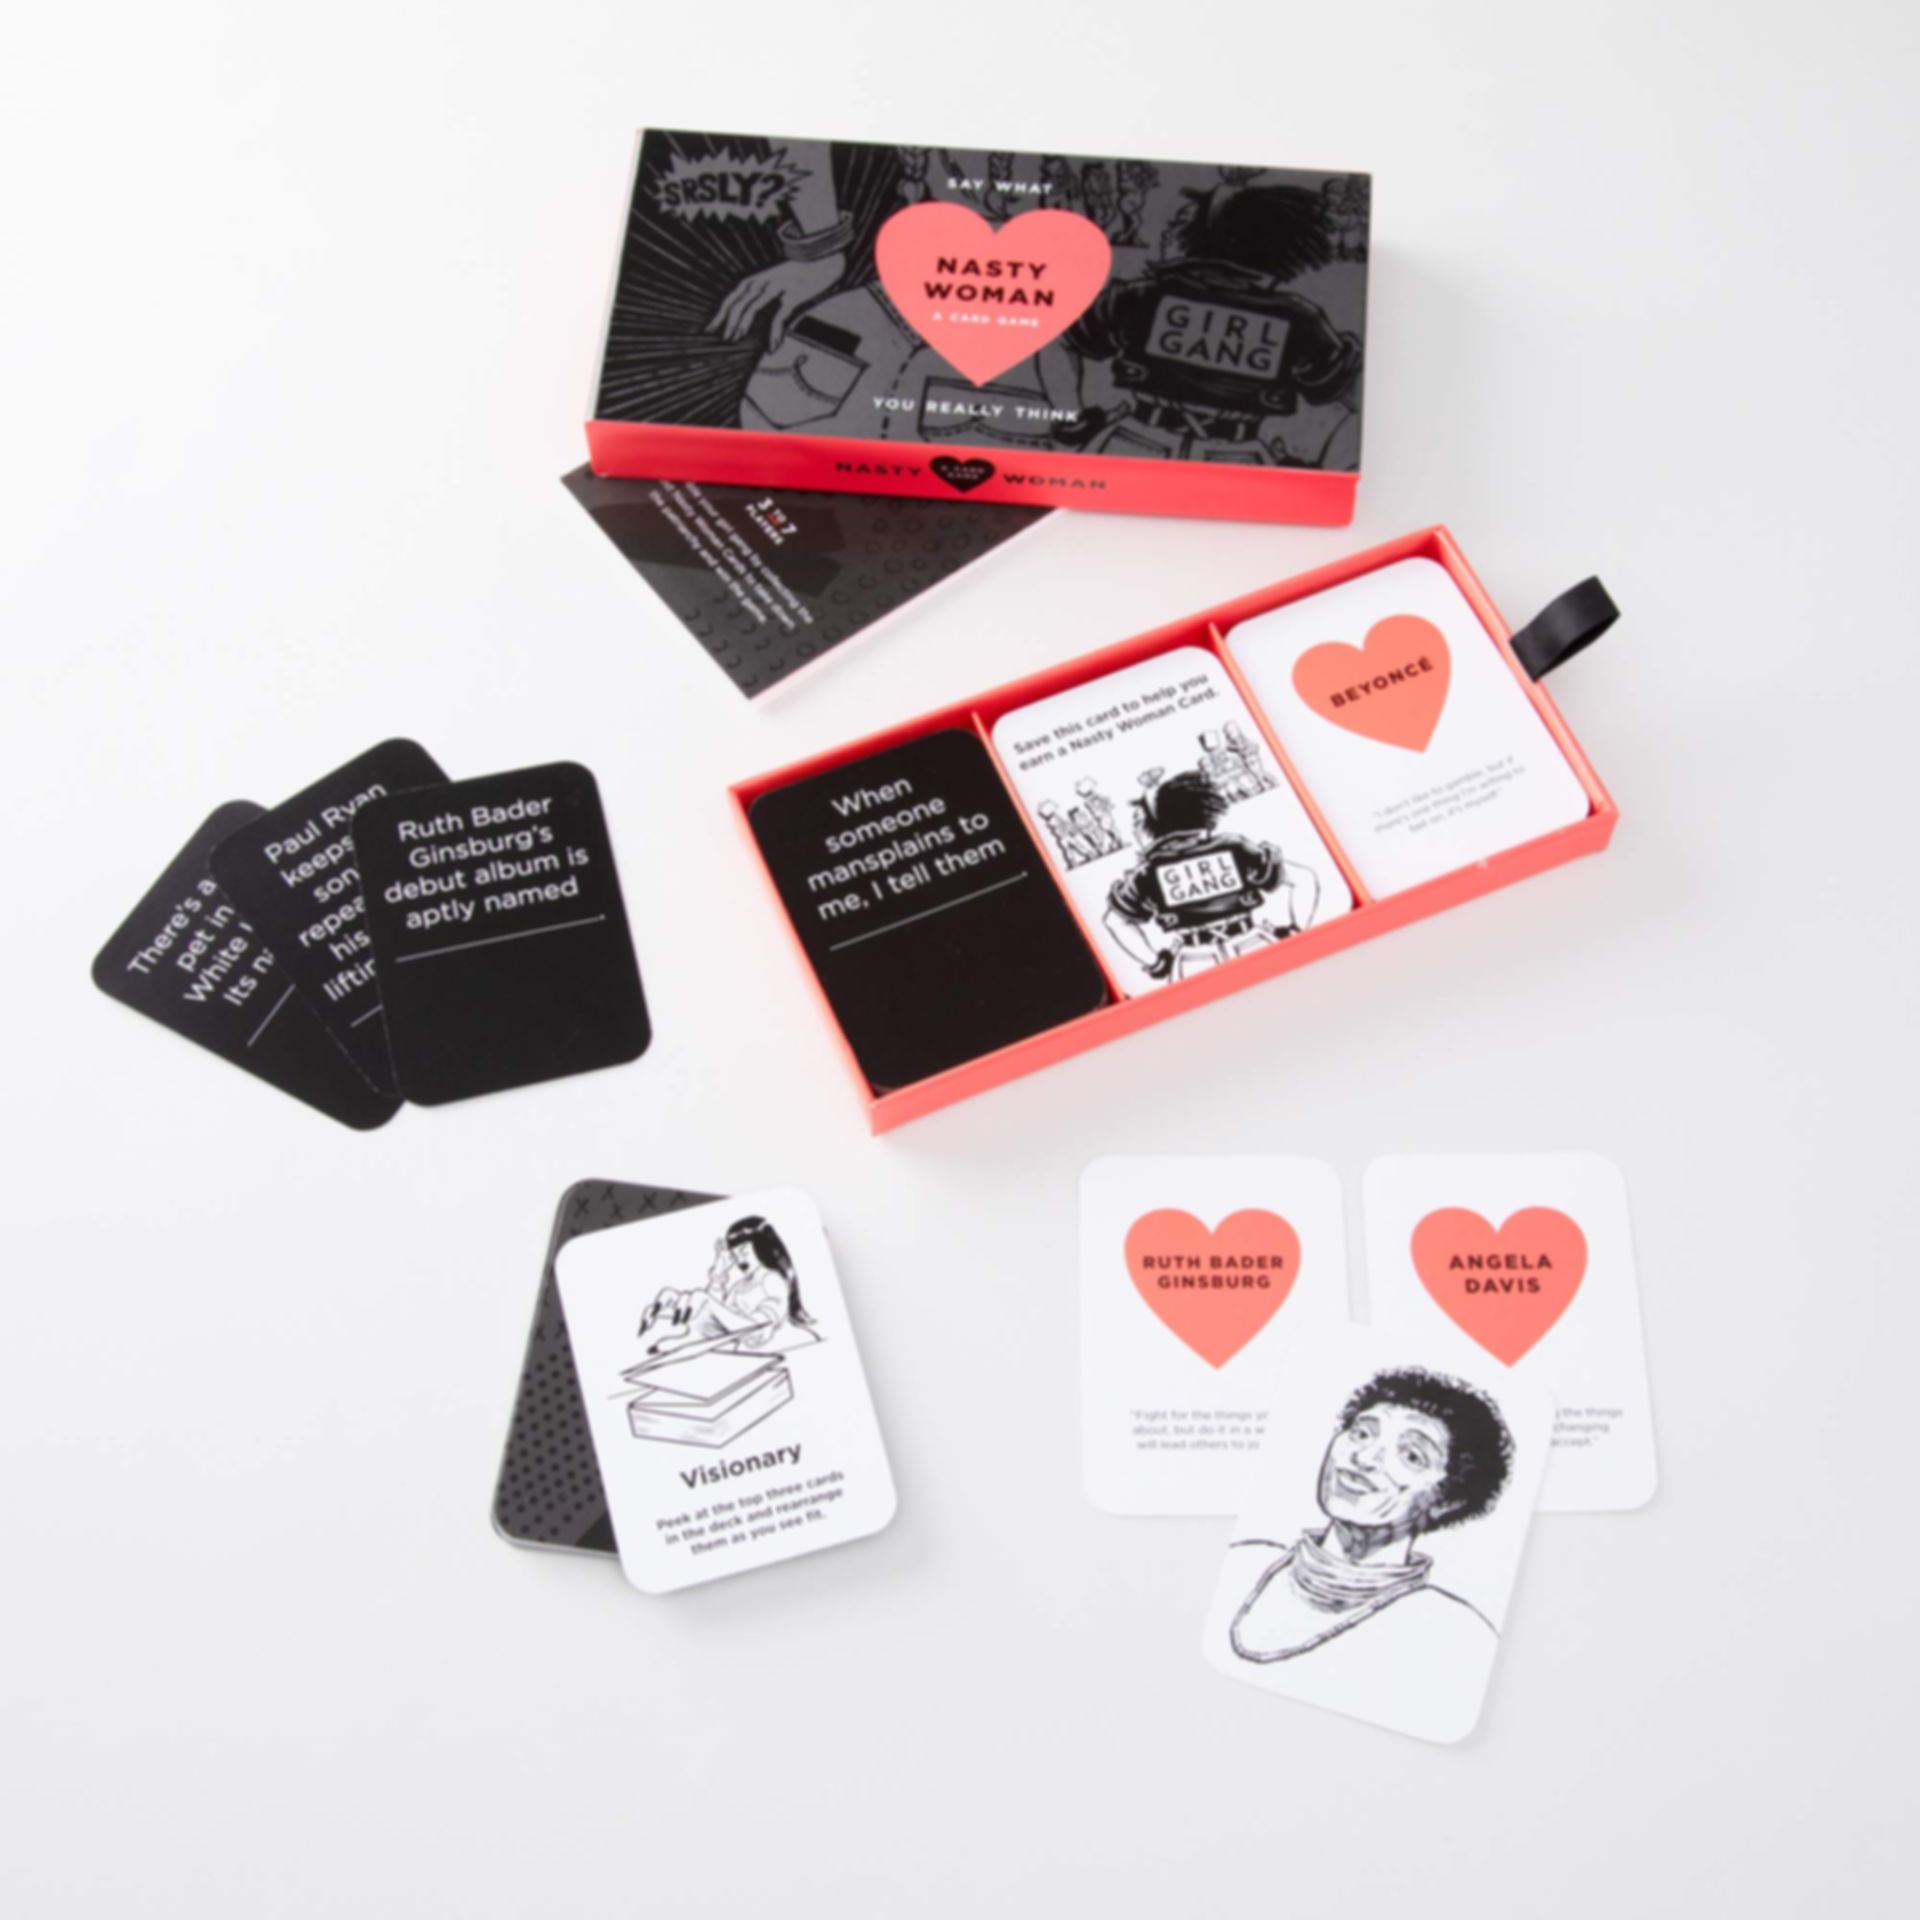 The Nasty Woman Game: A Card Game for Every Feminist components